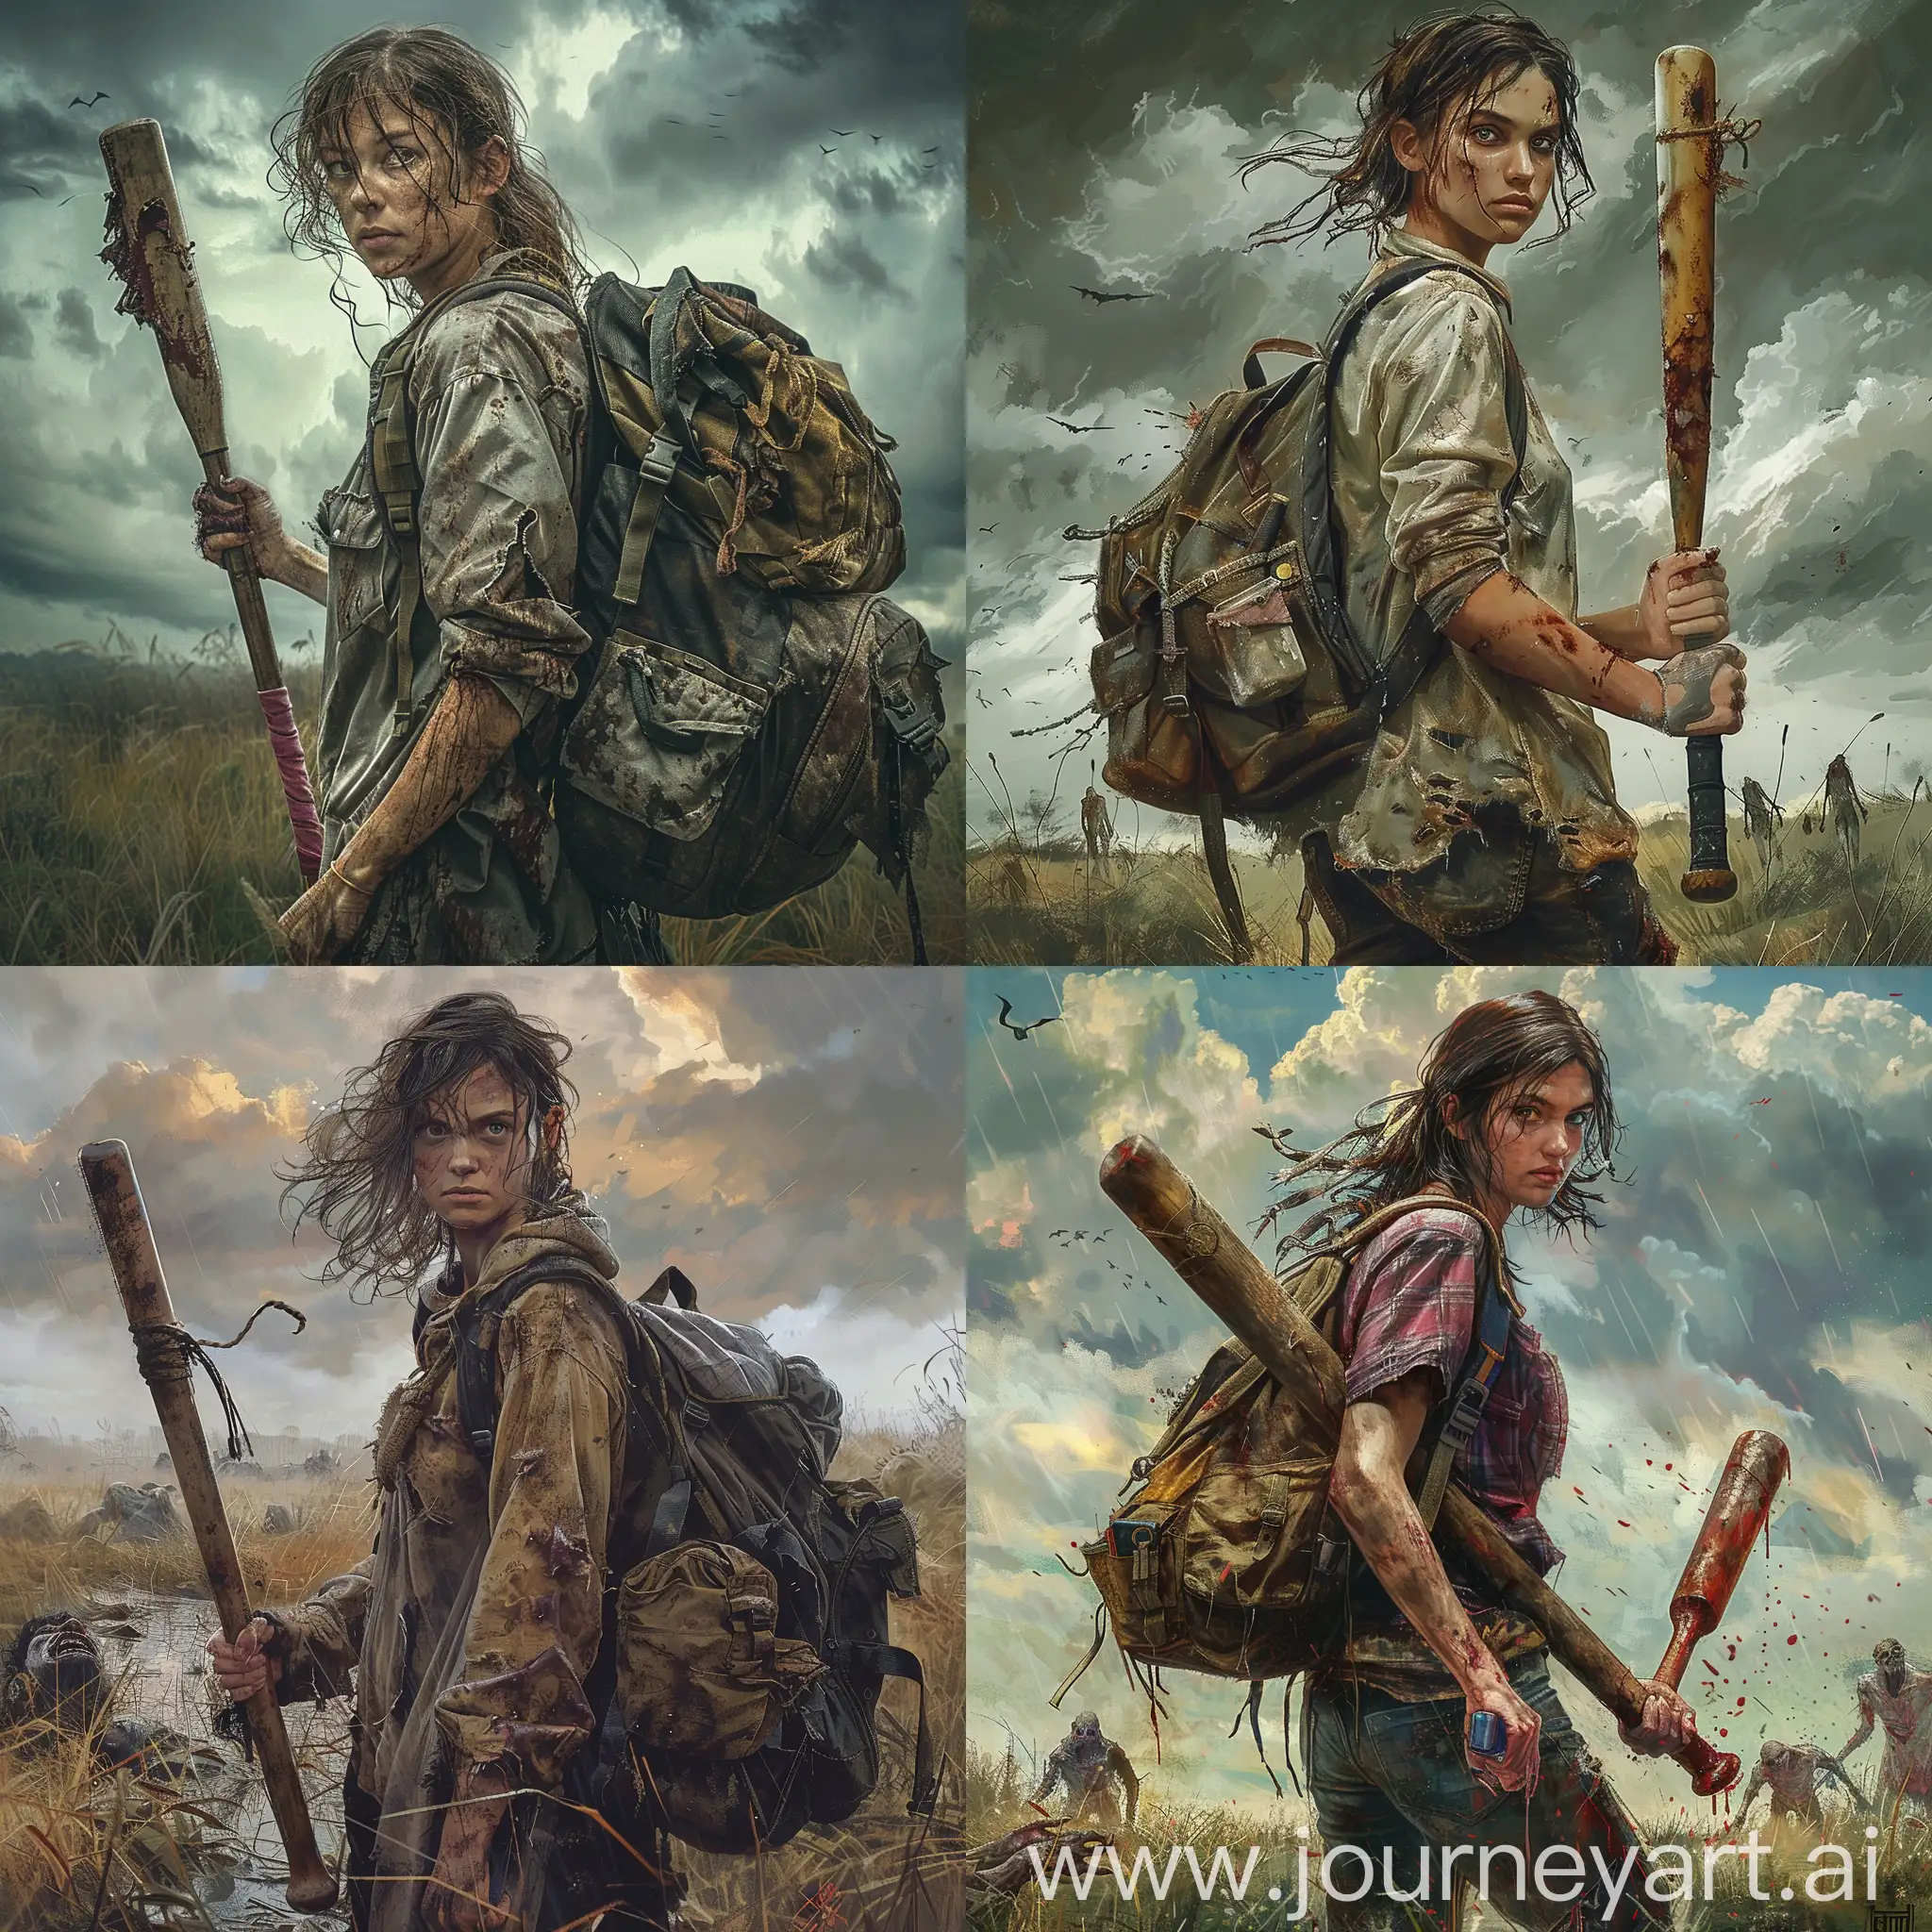 Survivor-Woman-with-Backpack-and-Baseball-Bat-in-PostApocalyptic-Zombie-Landscape